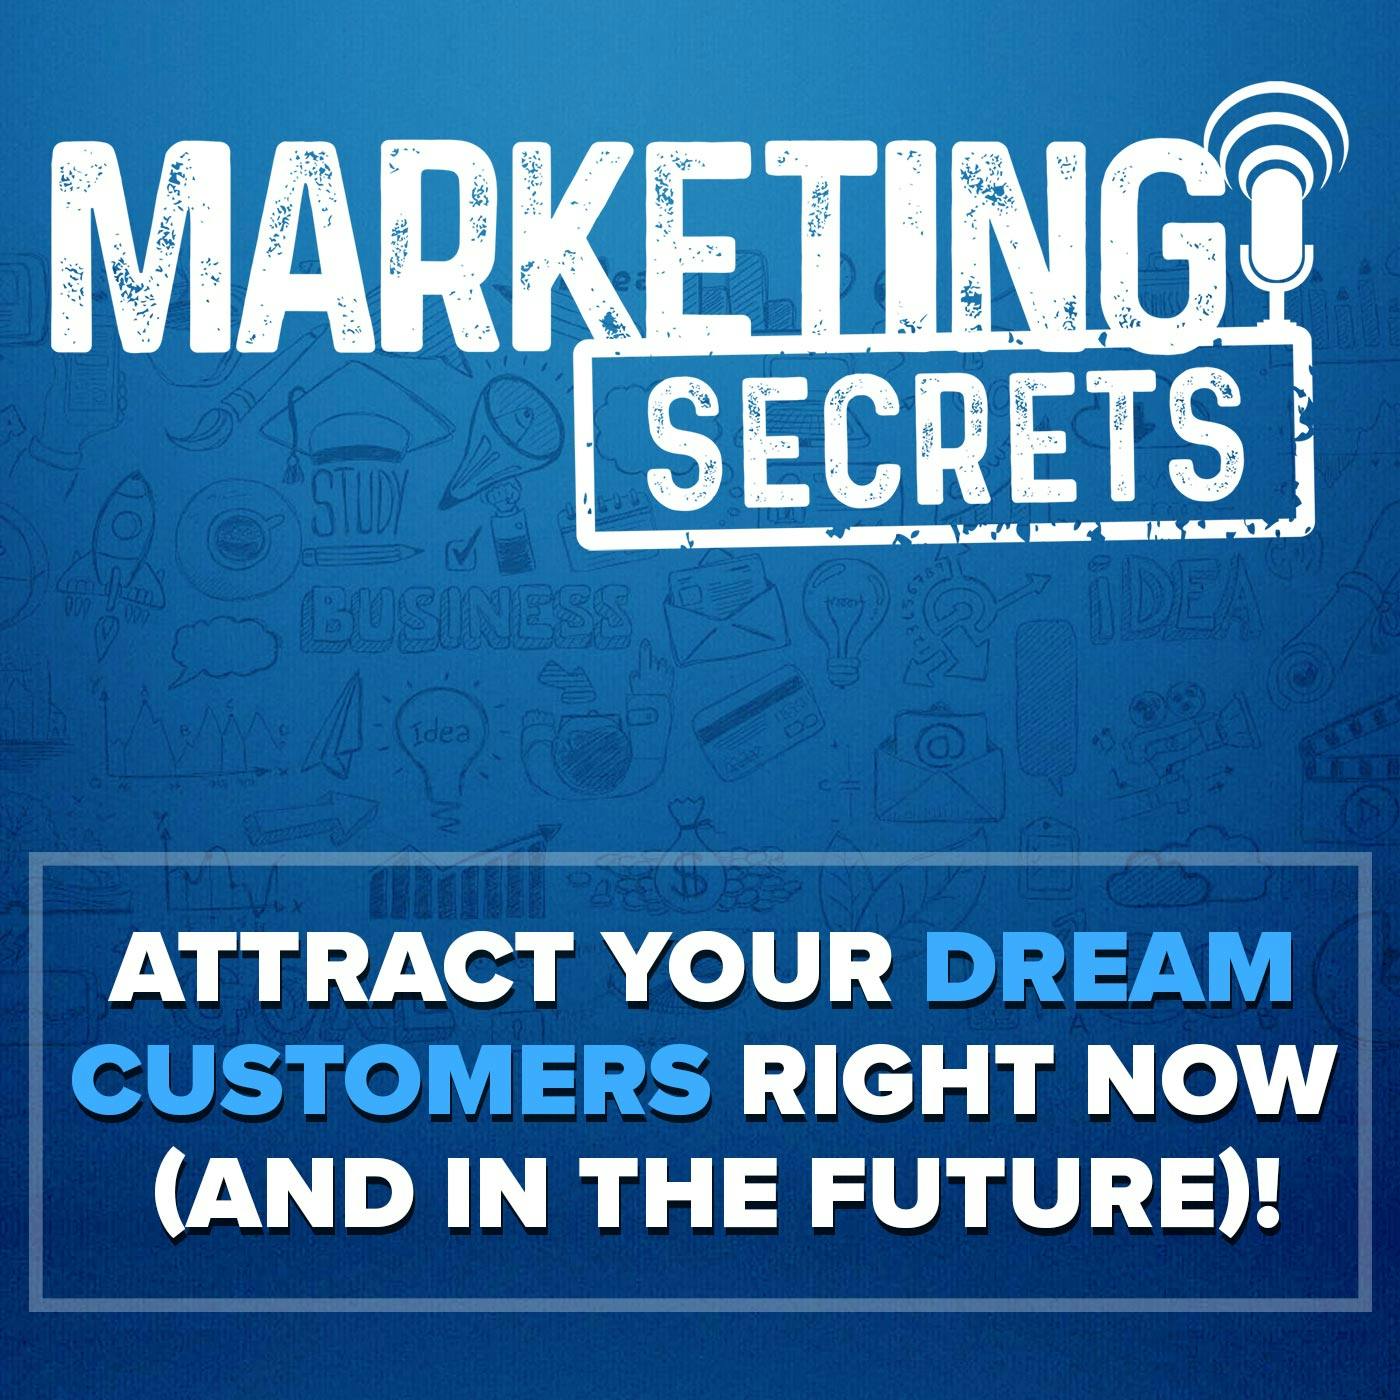 Attract Your Dream Customers RIGHT NOW (And In The Future)! (TS)